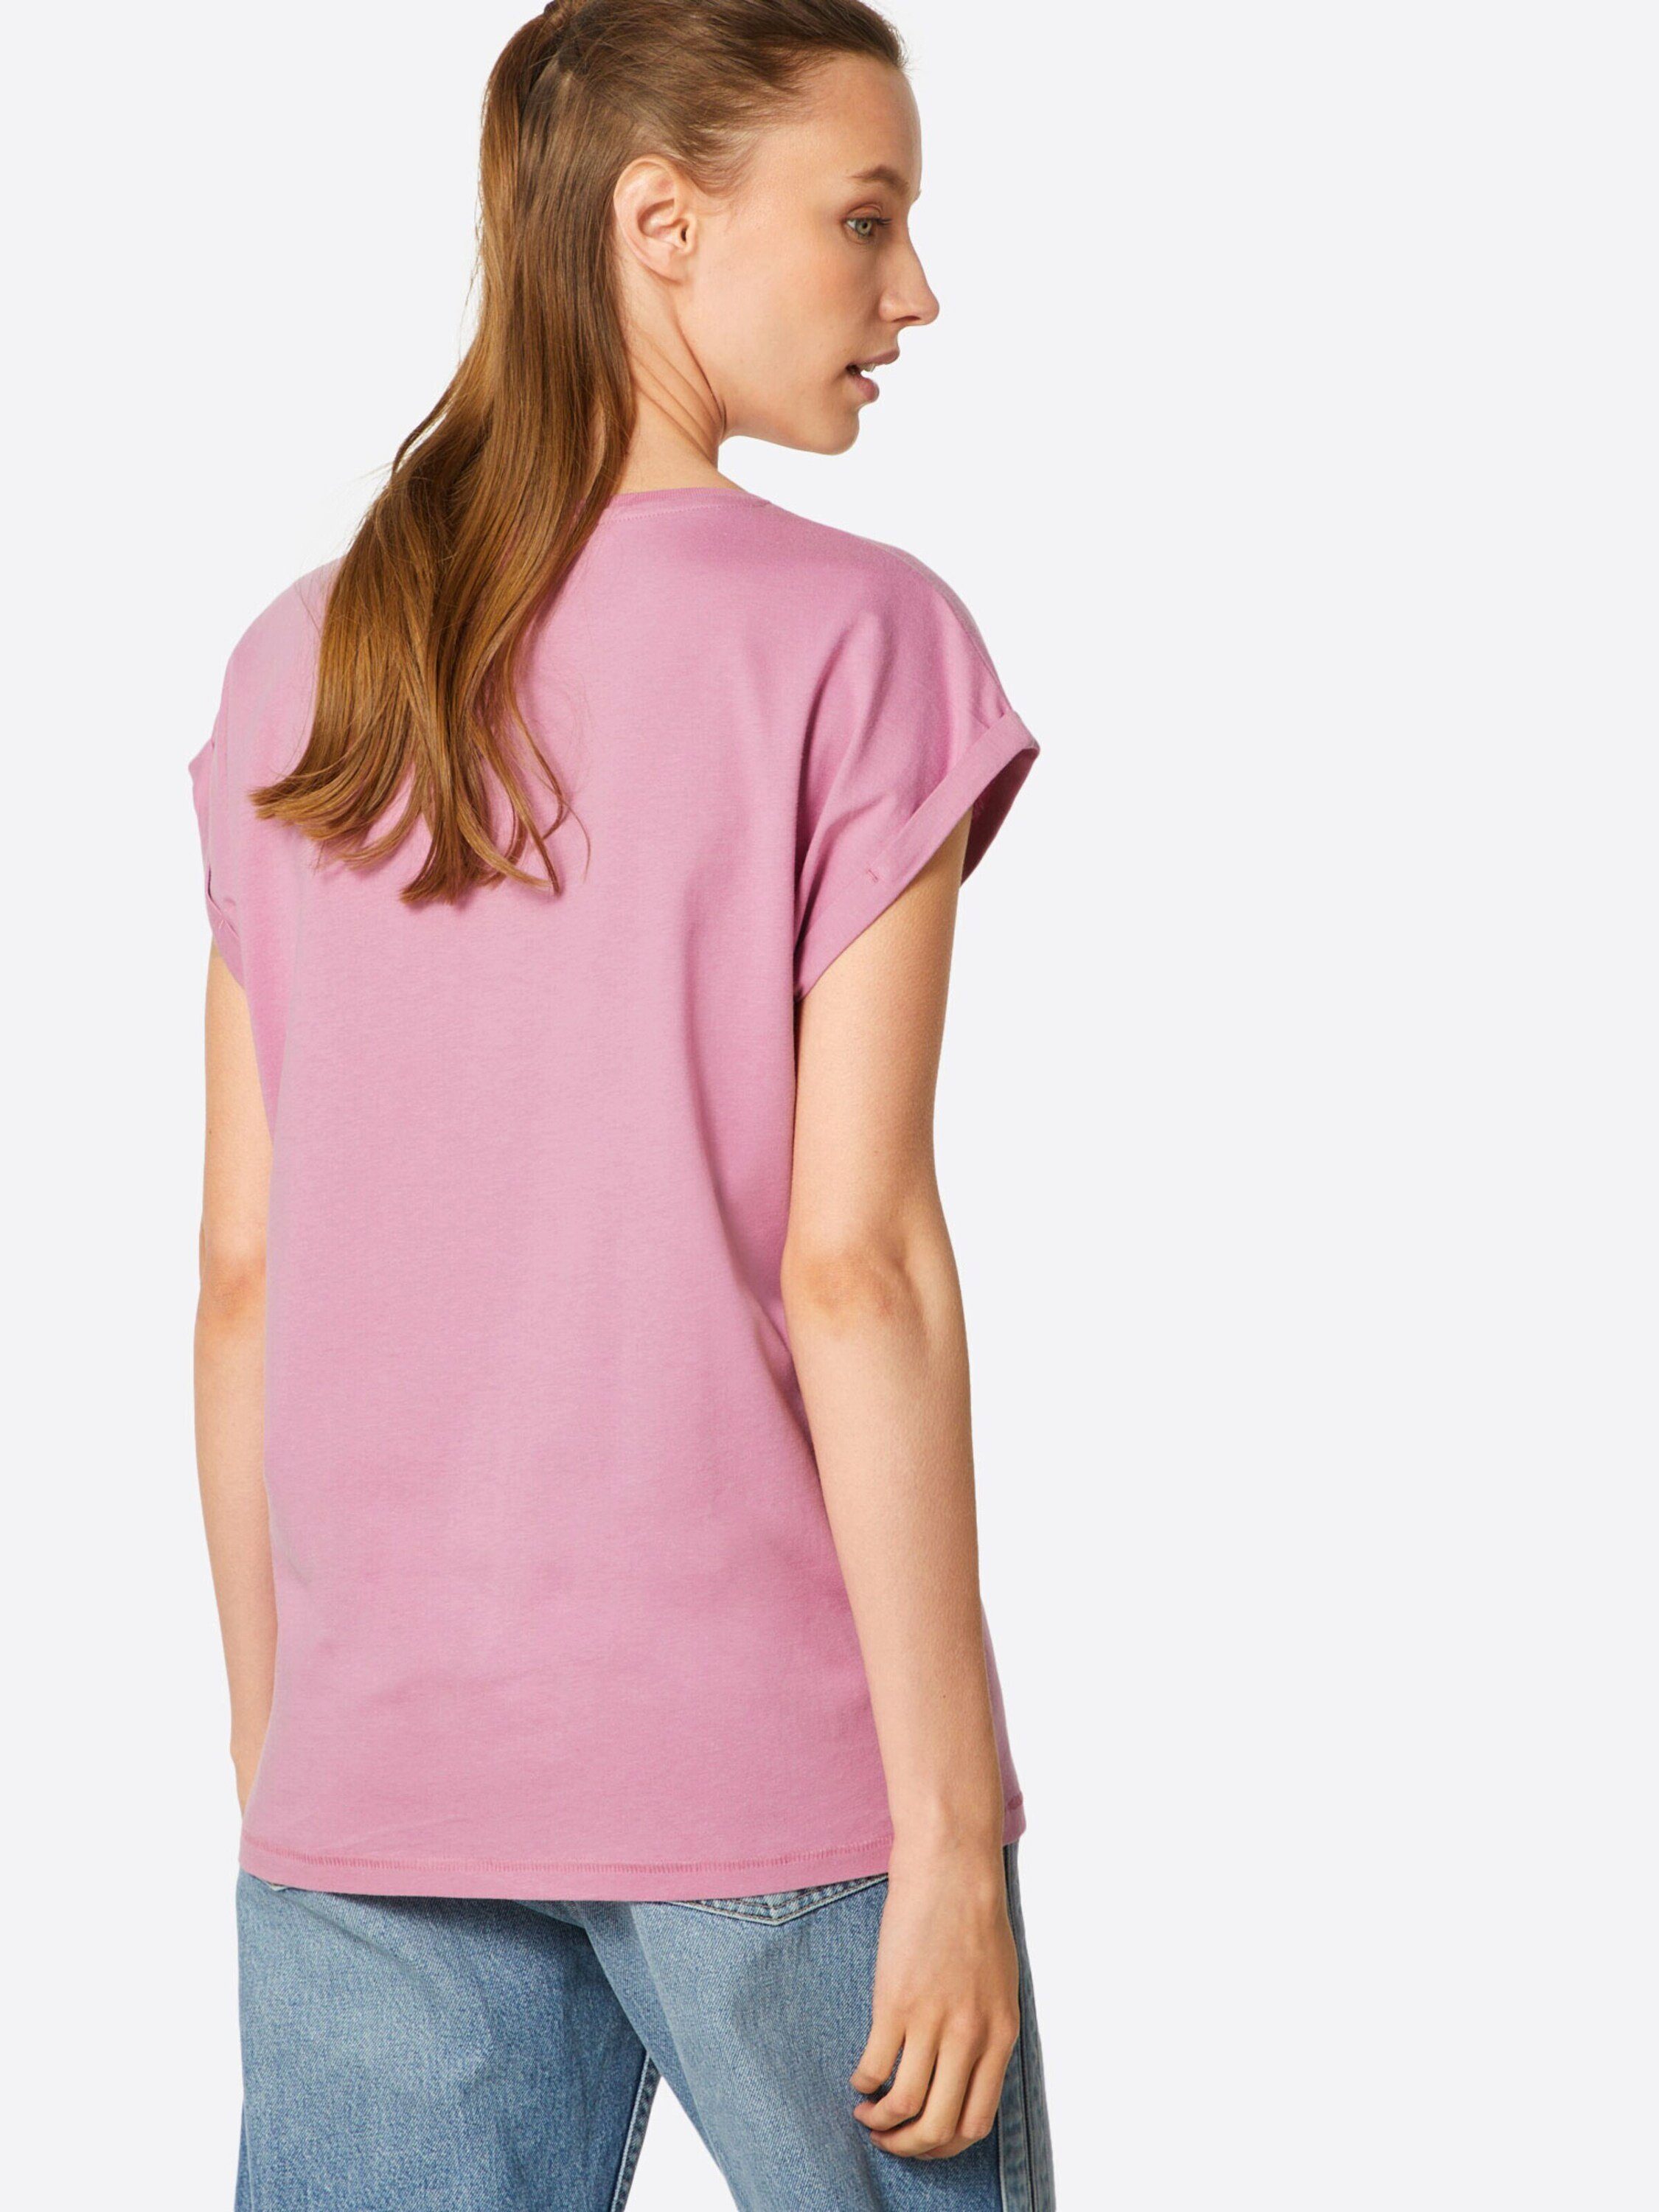 coolpink URBAN Extended T-Shirt CLASSICS Weiteres Detail Plain/ohne (1-tlg) Shoulder TB771 Details,